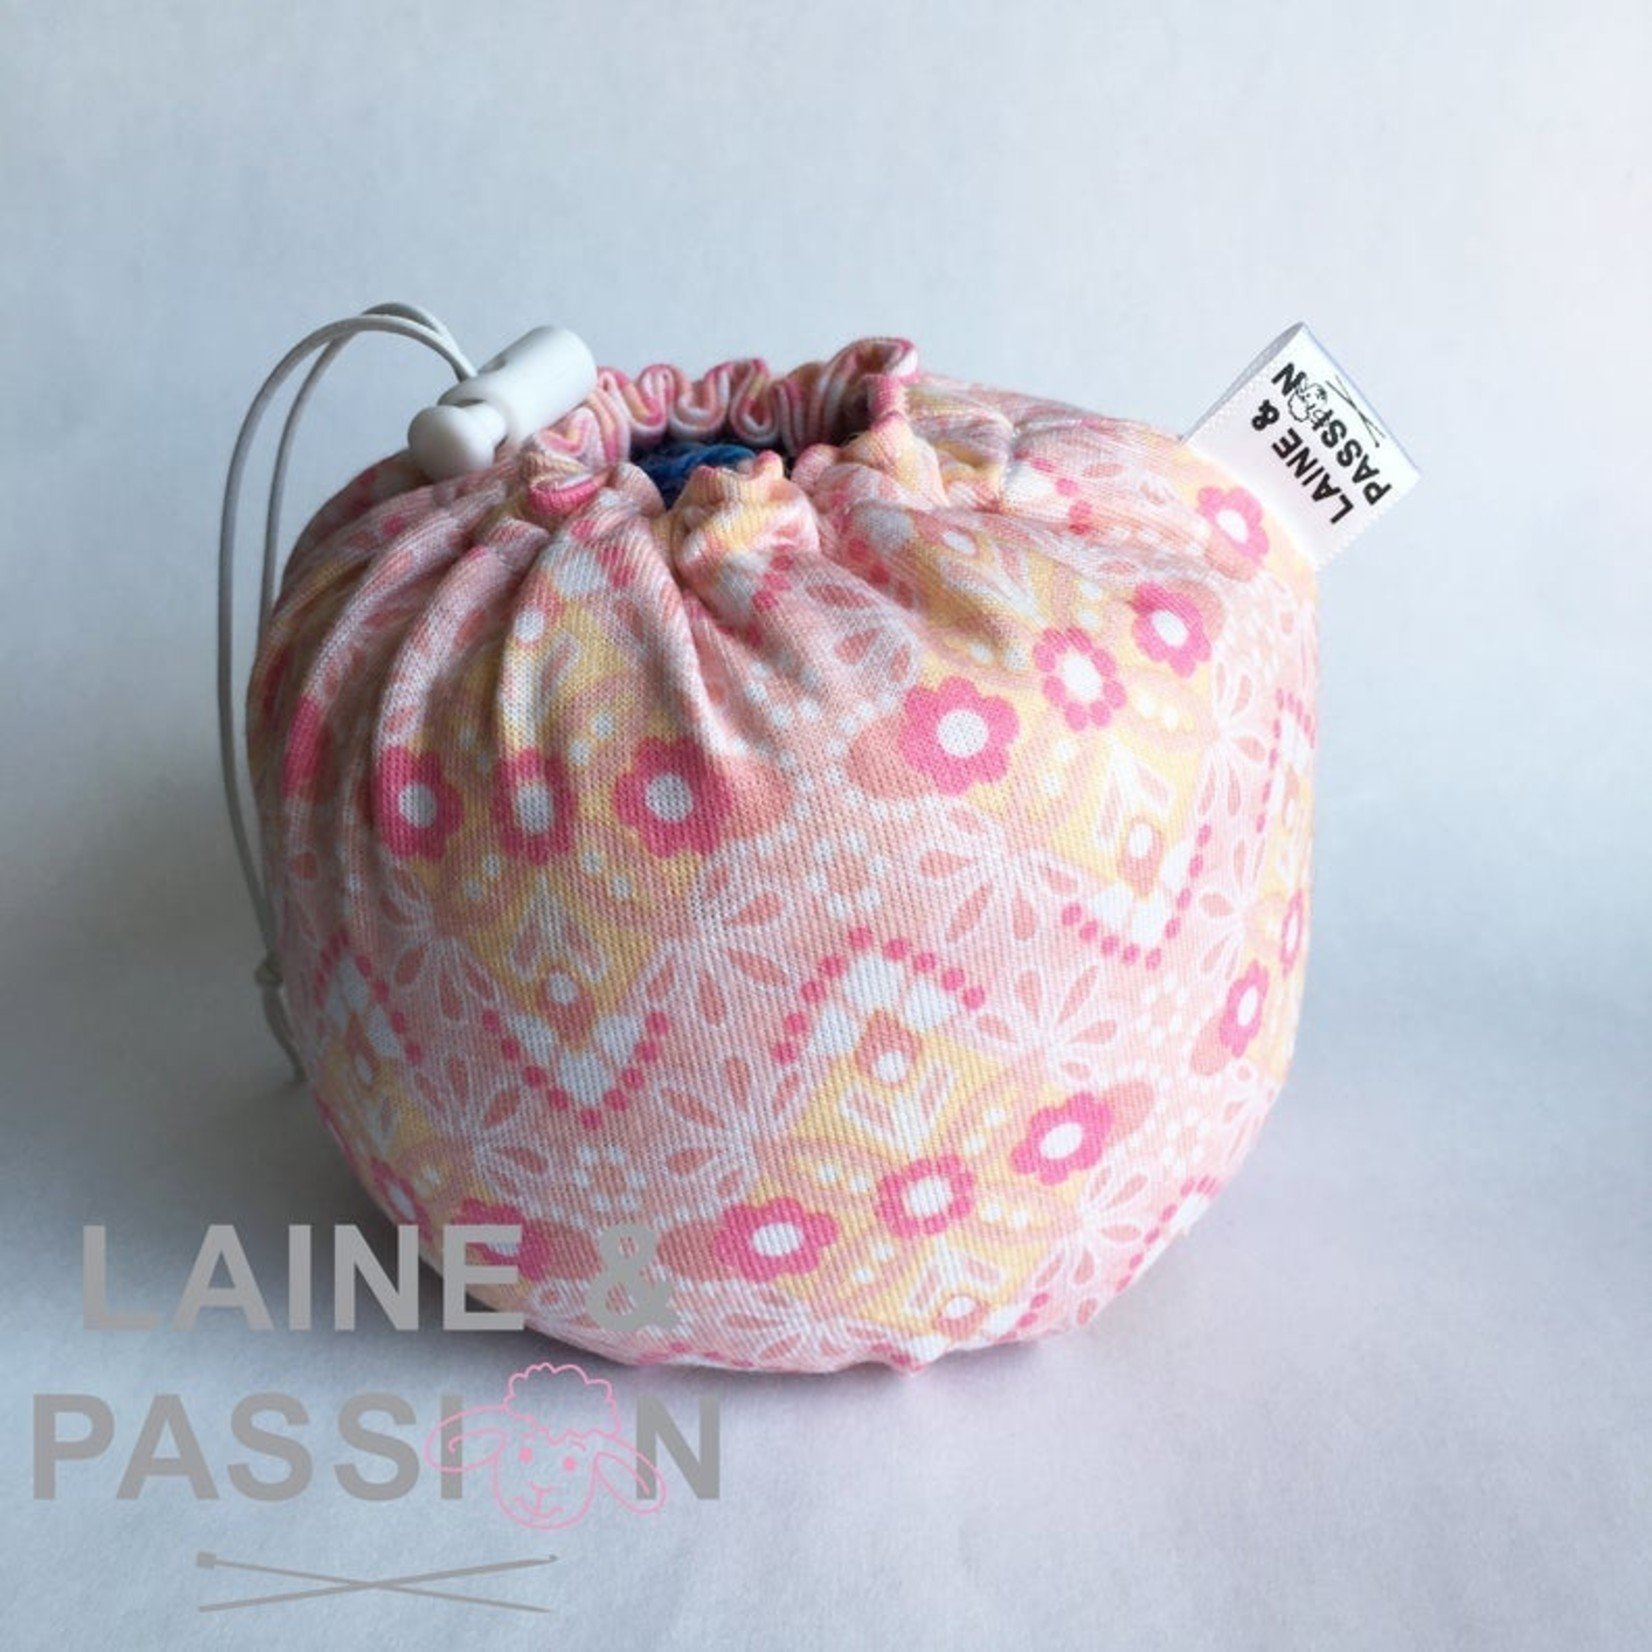 Laine & Passion Couvre-Cake